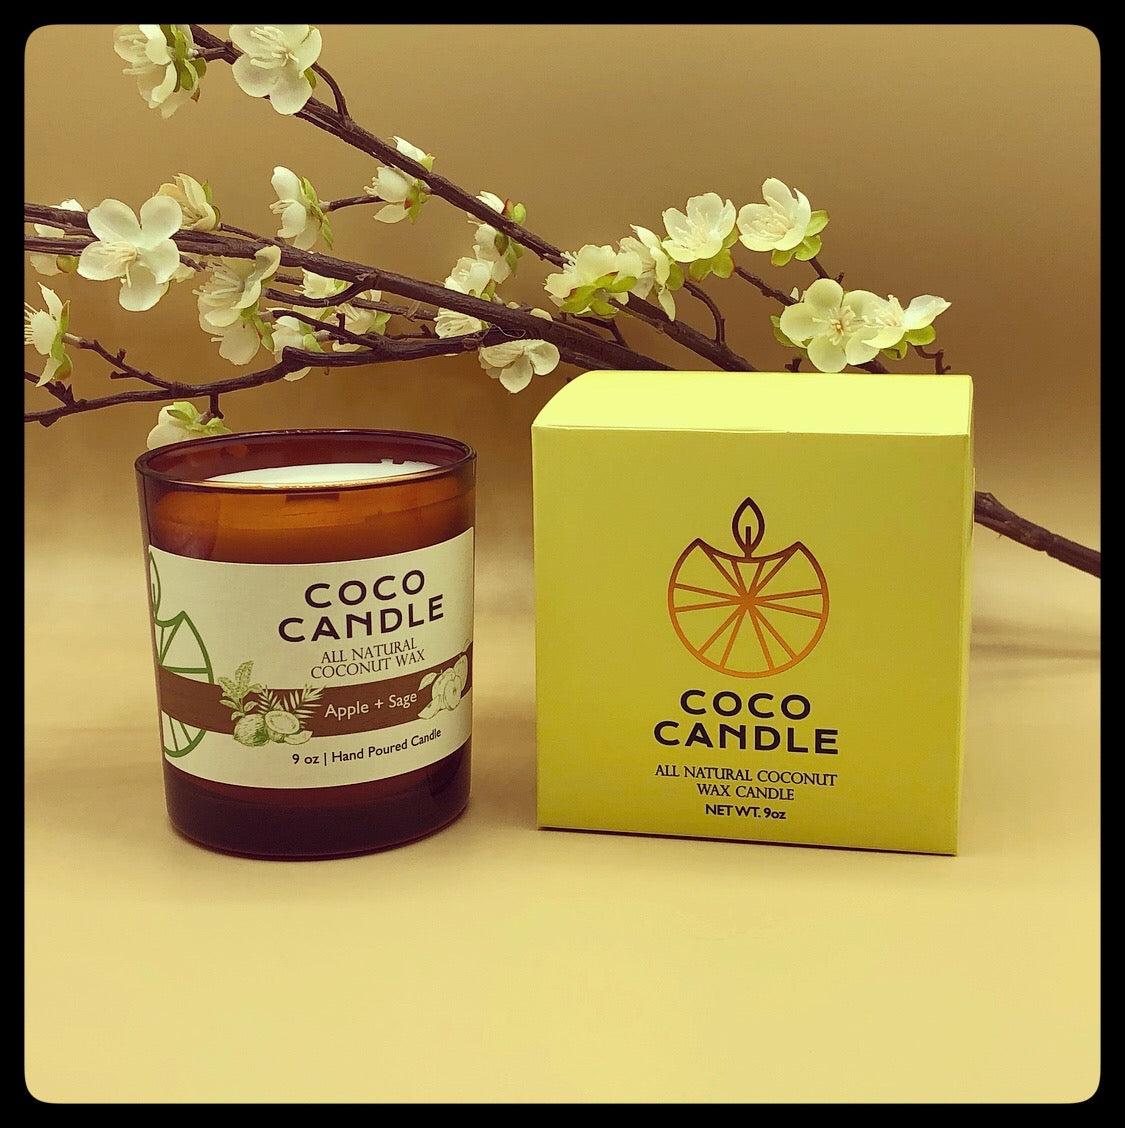 Coco Candle | An all-natural coconut wax candle hand poured into a sophisticated amber glass vessel enhanced by the soothing crackle of a wooden wick.  A refreshing blend of sweet, juicy apple and herbaceous sage.  